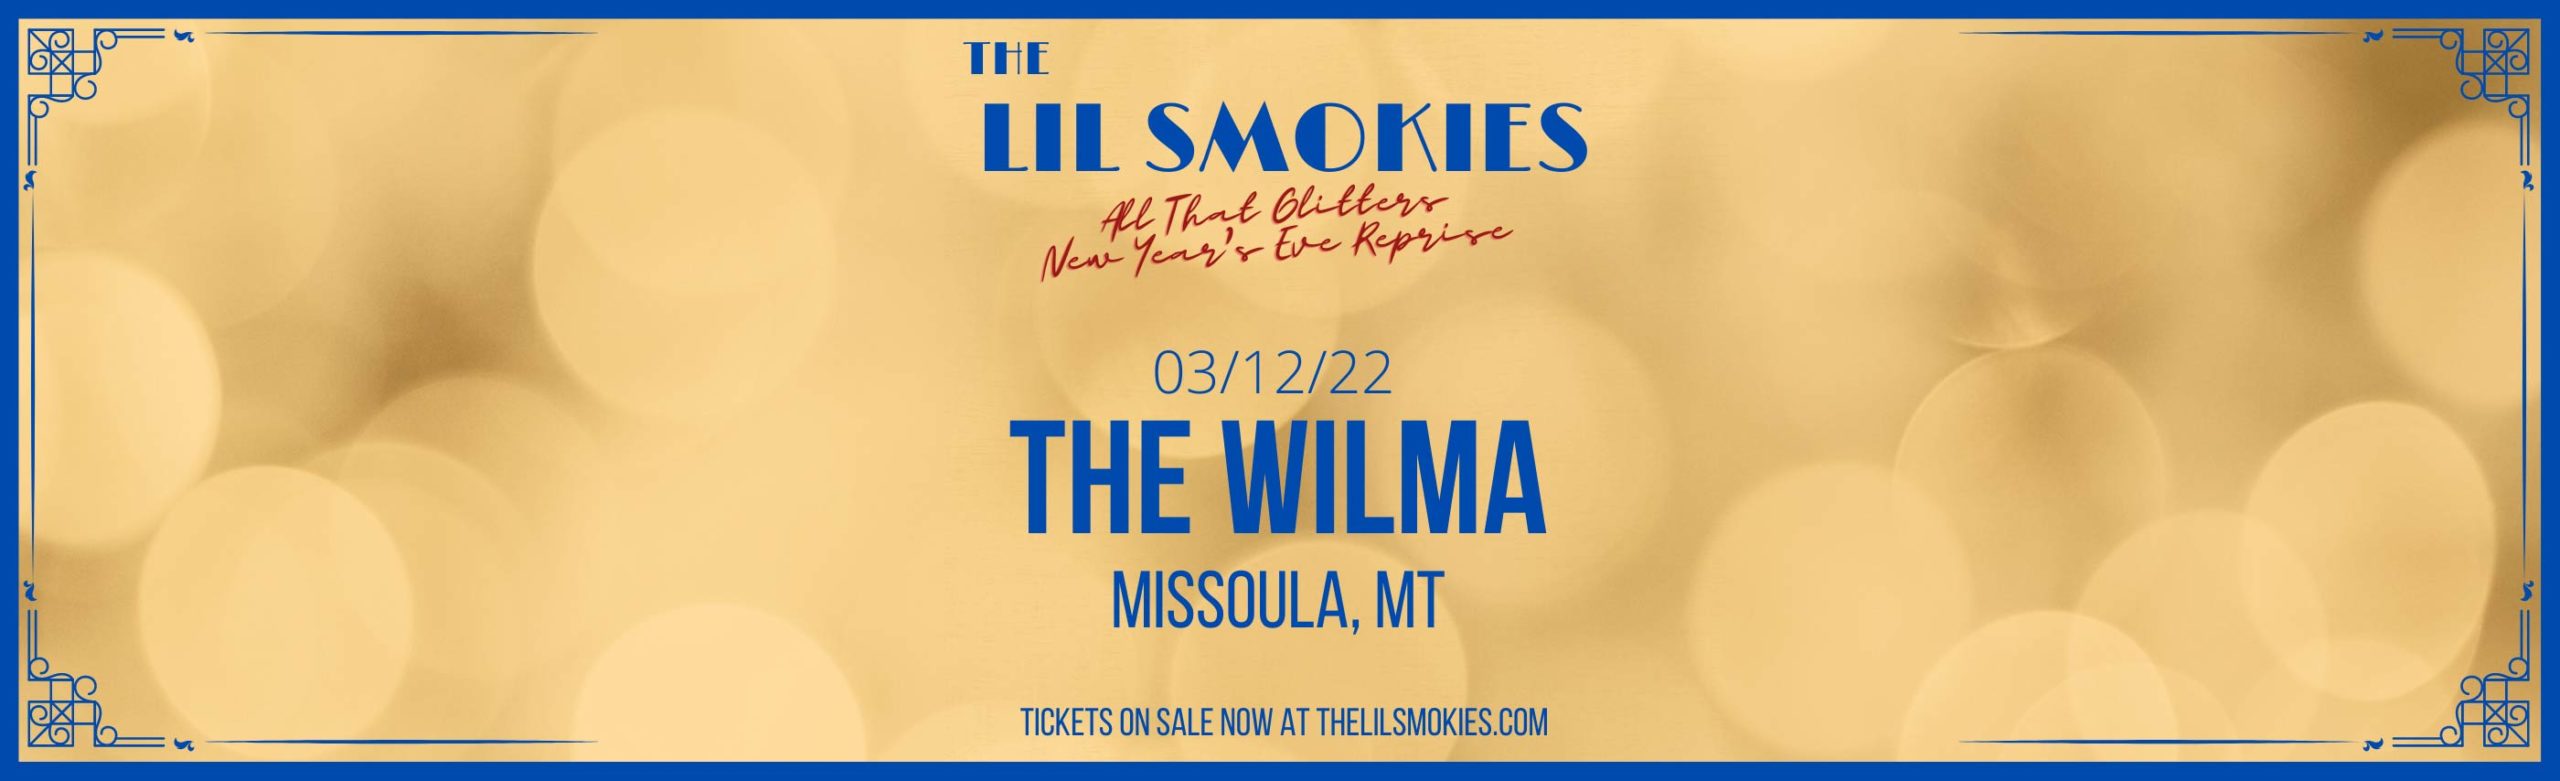 Event Info: The Lil Smokies at The Wilma 2022 Image